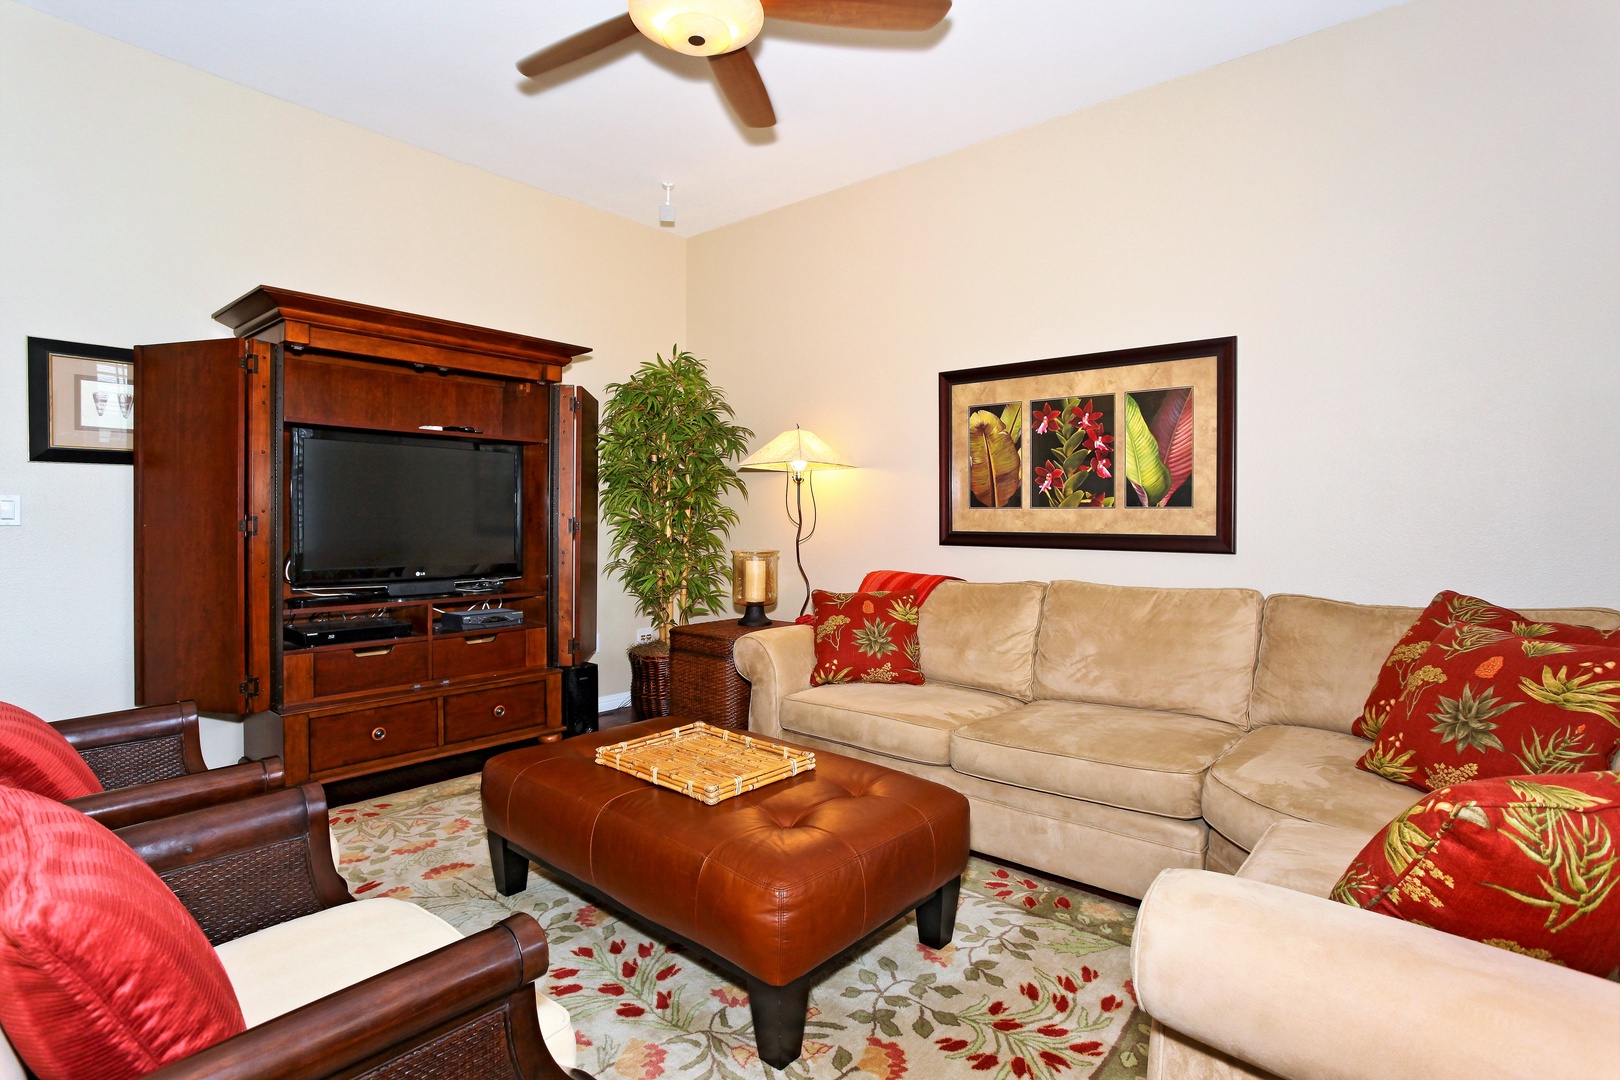 Kapolei Vacation Rentals, Coconut Plantation 1108-2 - Sink into the plush seating in the living area surrounded by natural wood tones.